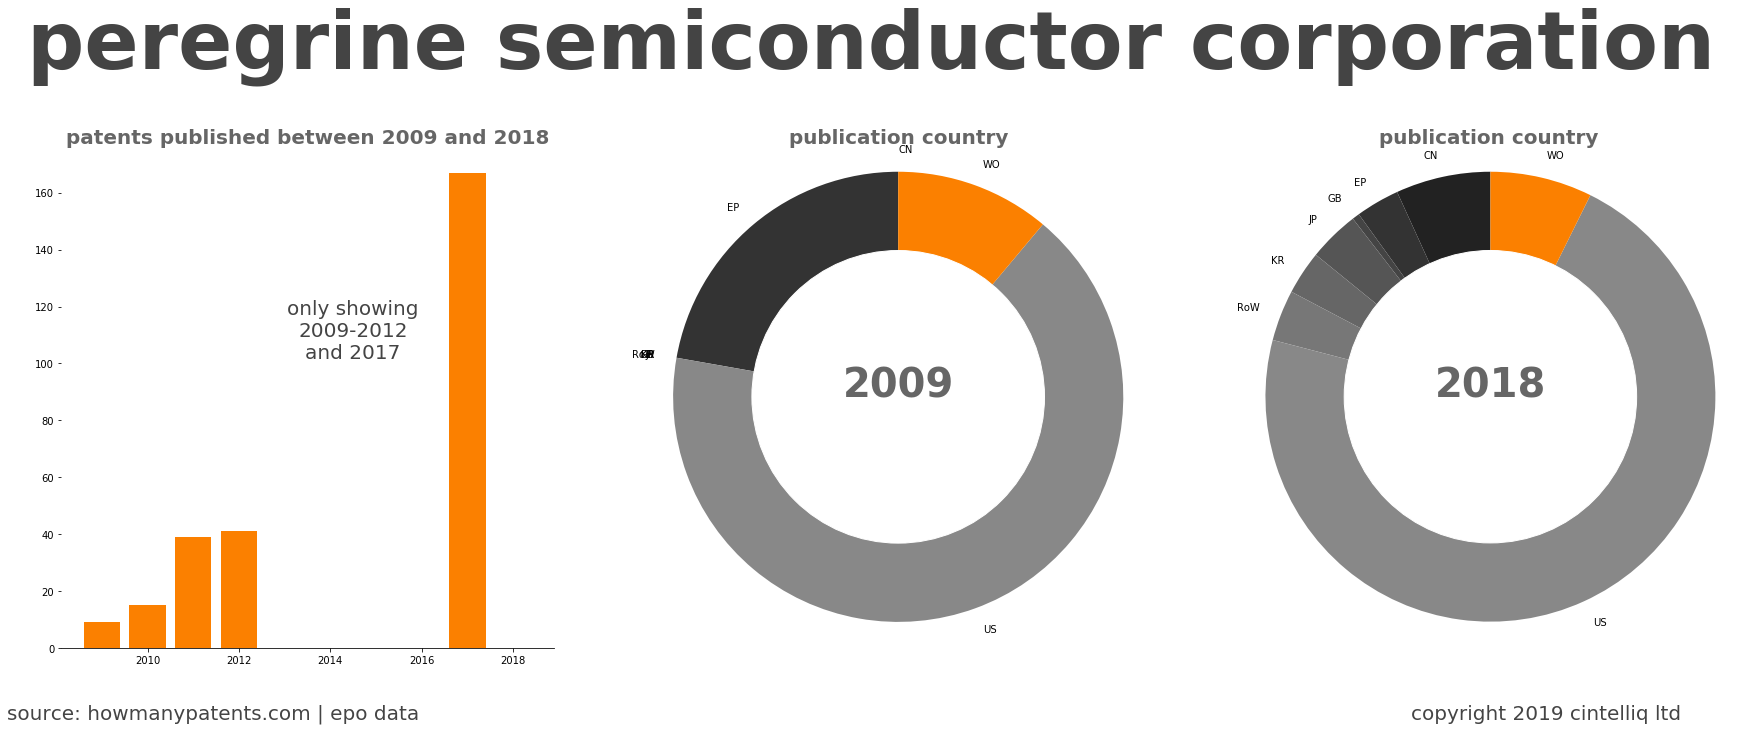 summary of patents for Peregrine Semiconductor Corporation